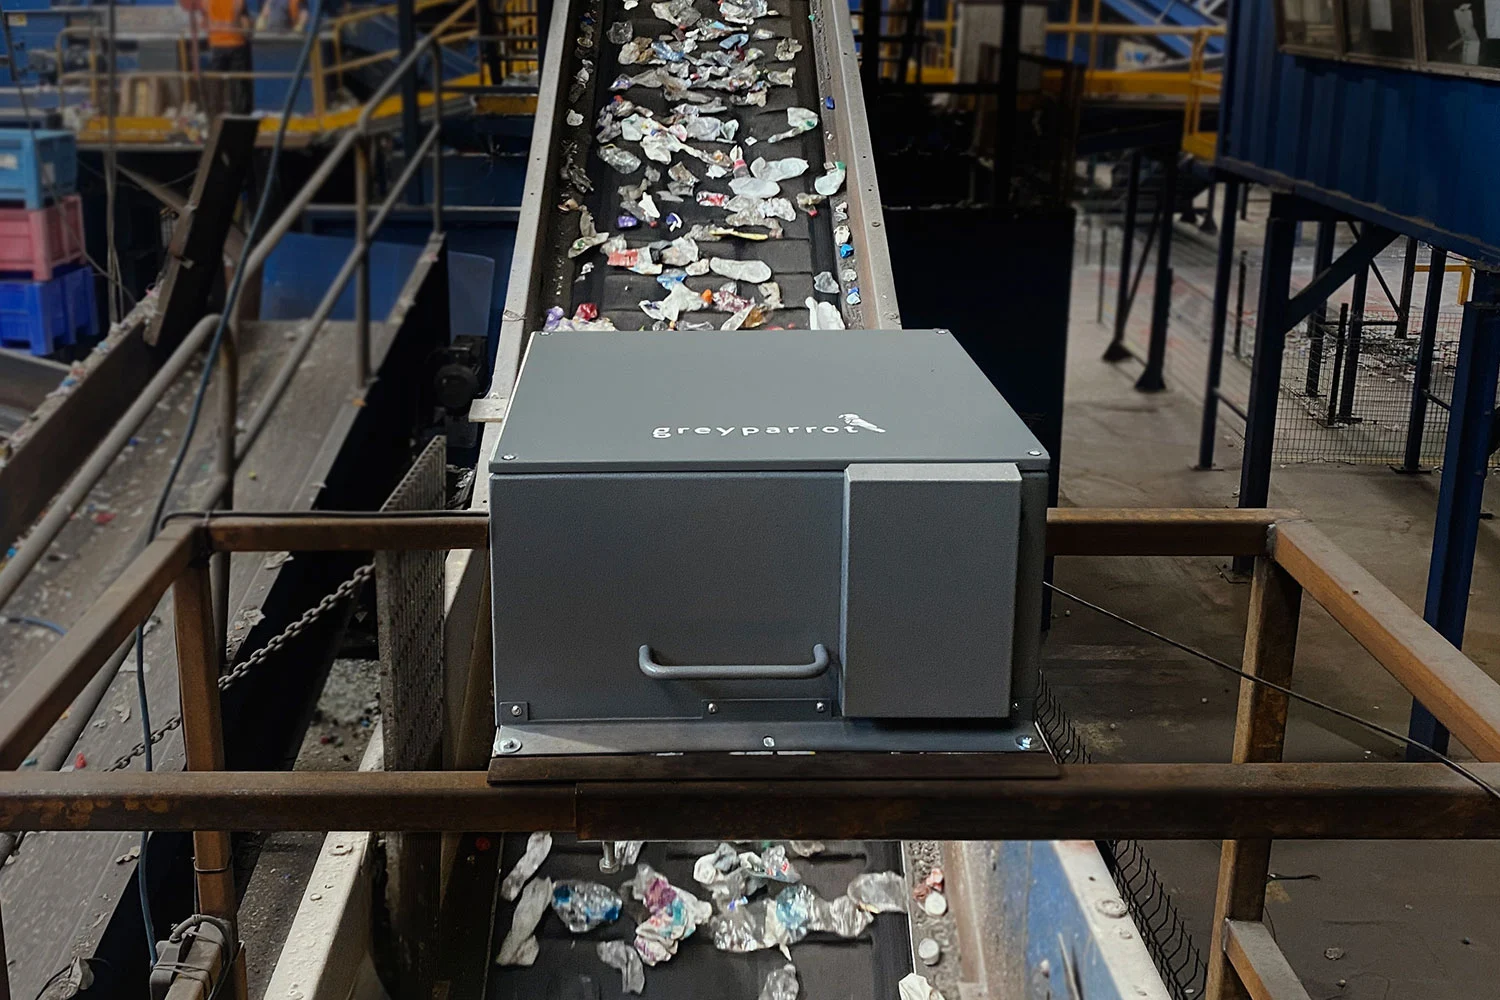 Greyparrot AI working in a waste management conveyor belt.